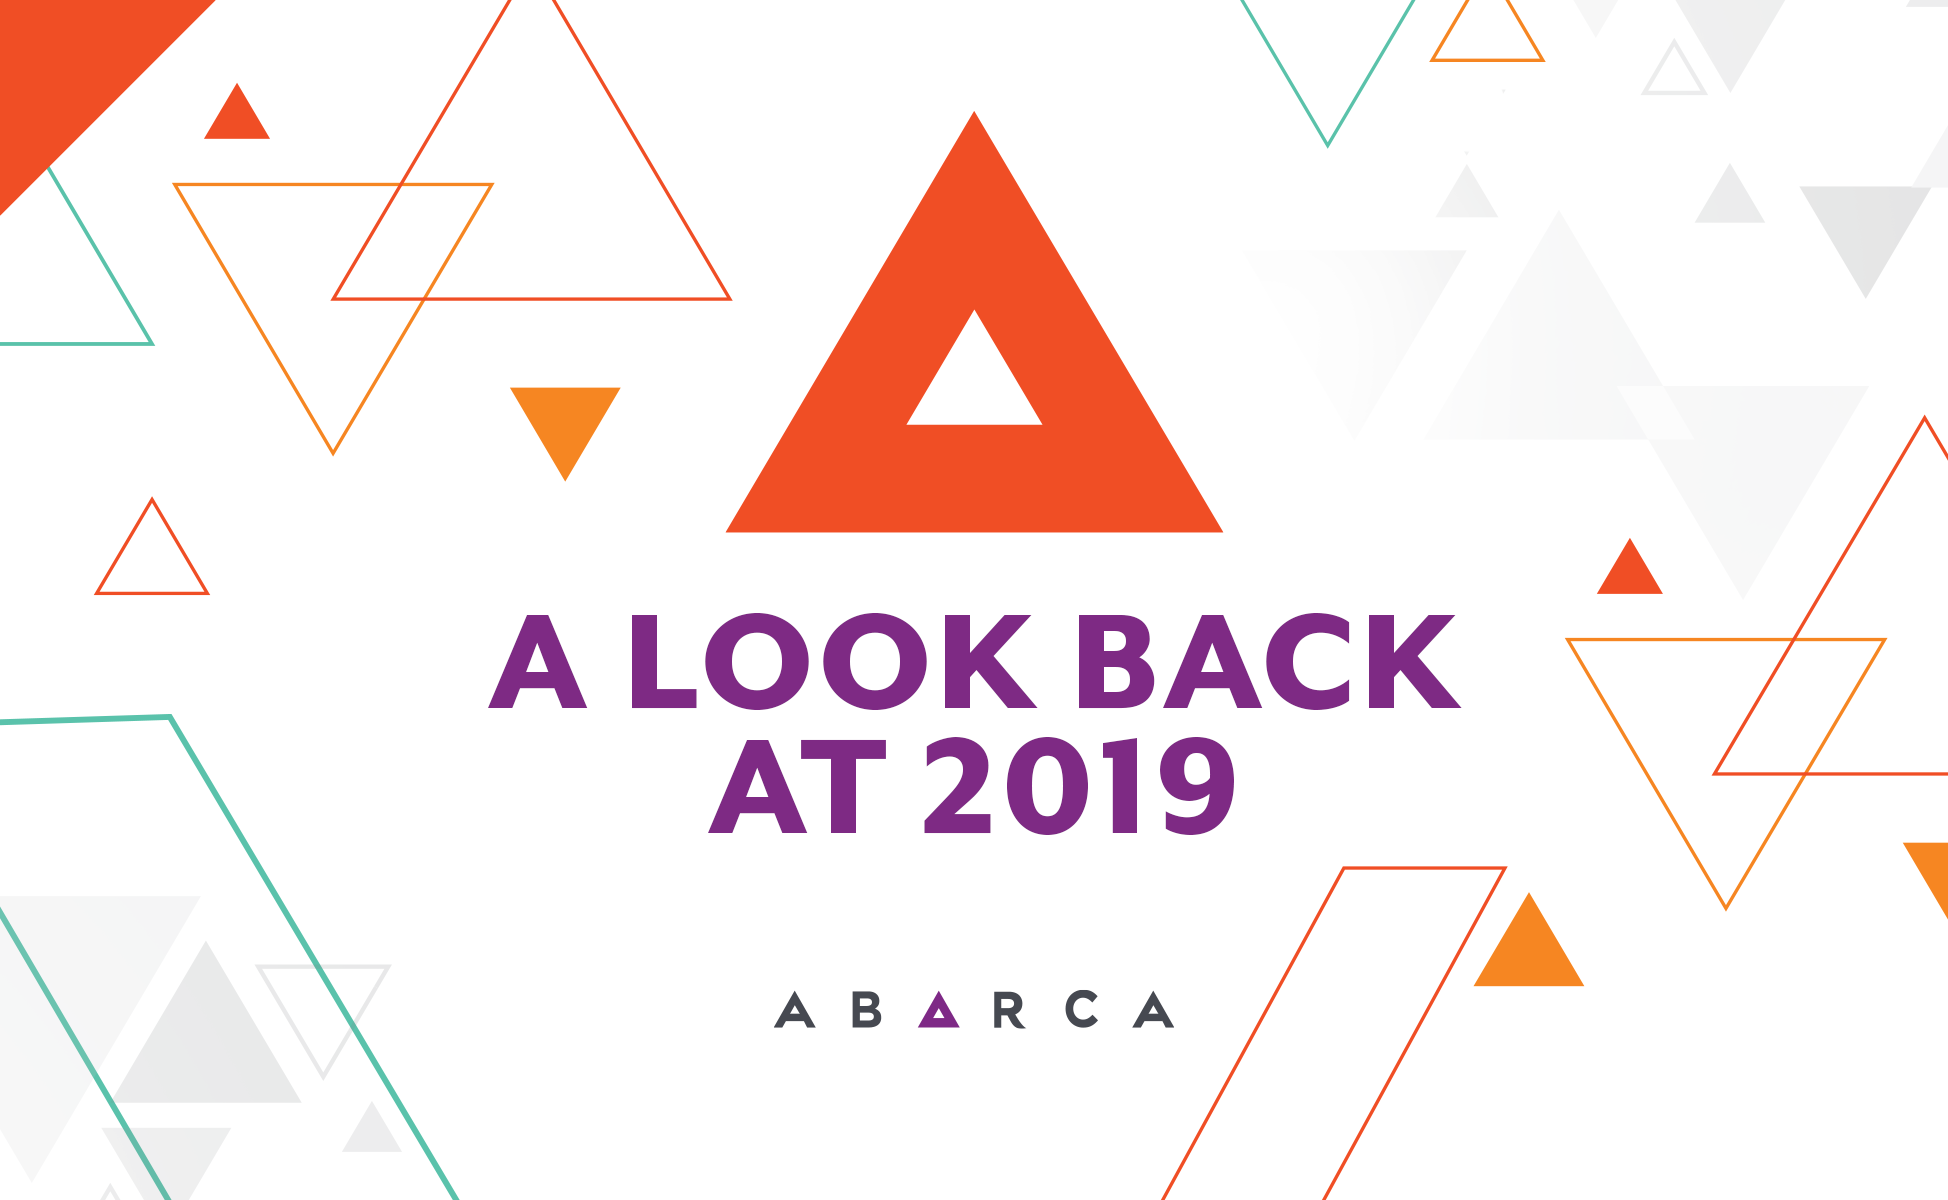 A Look Back at 2019: Abarca's Proudest Moments